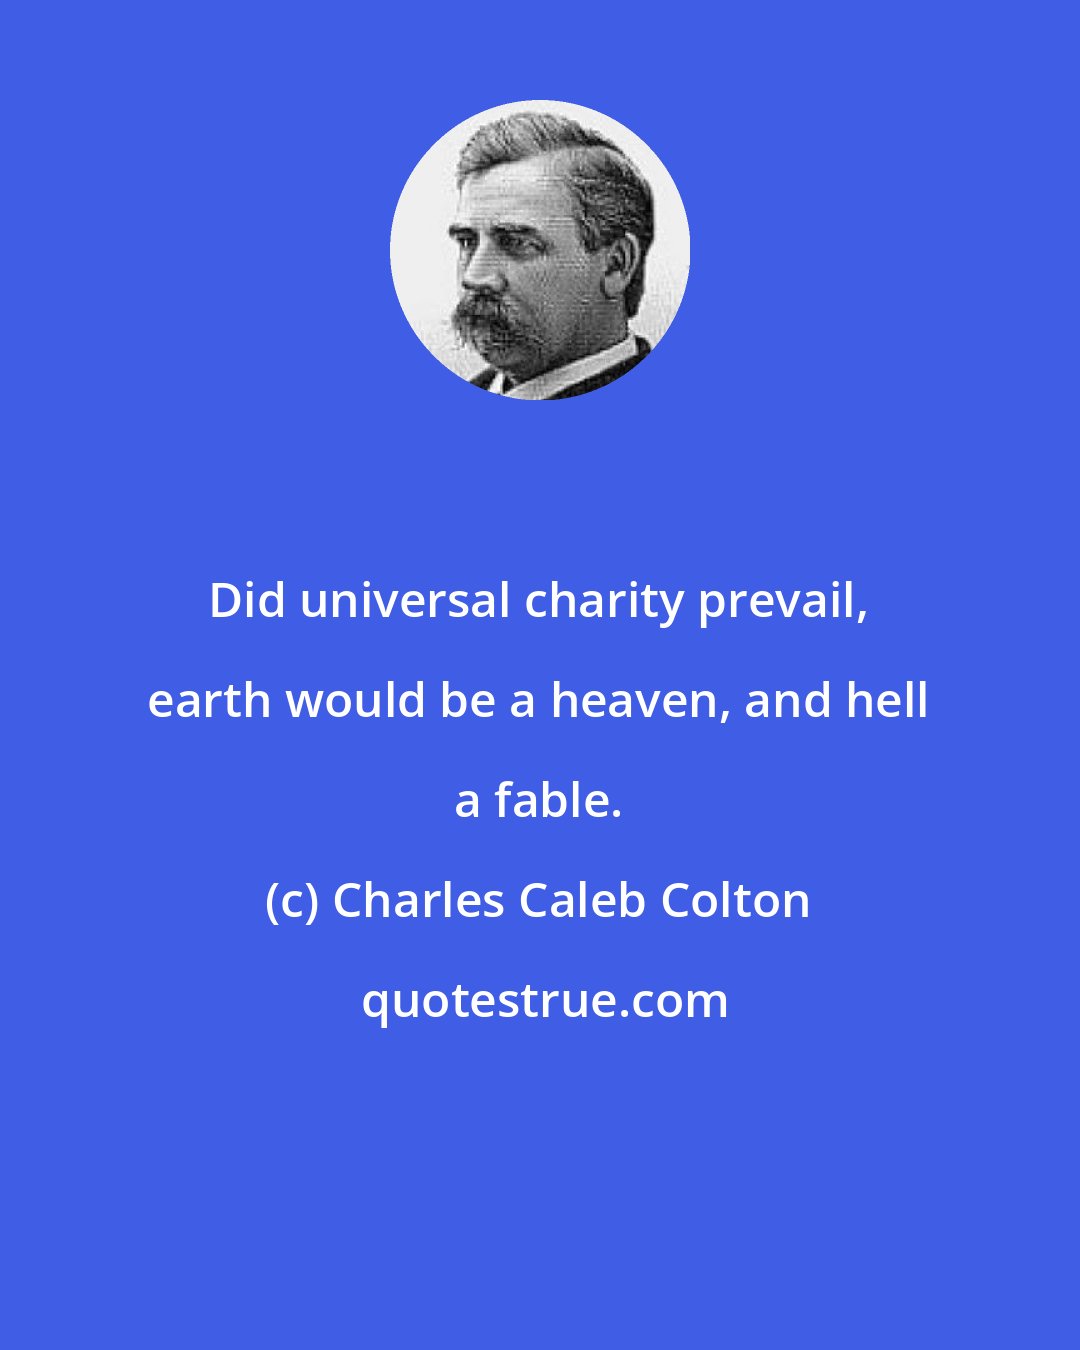 Charles Caleb Colton: Did universal charity prevail, earth would be a heaven, and hell a fable.